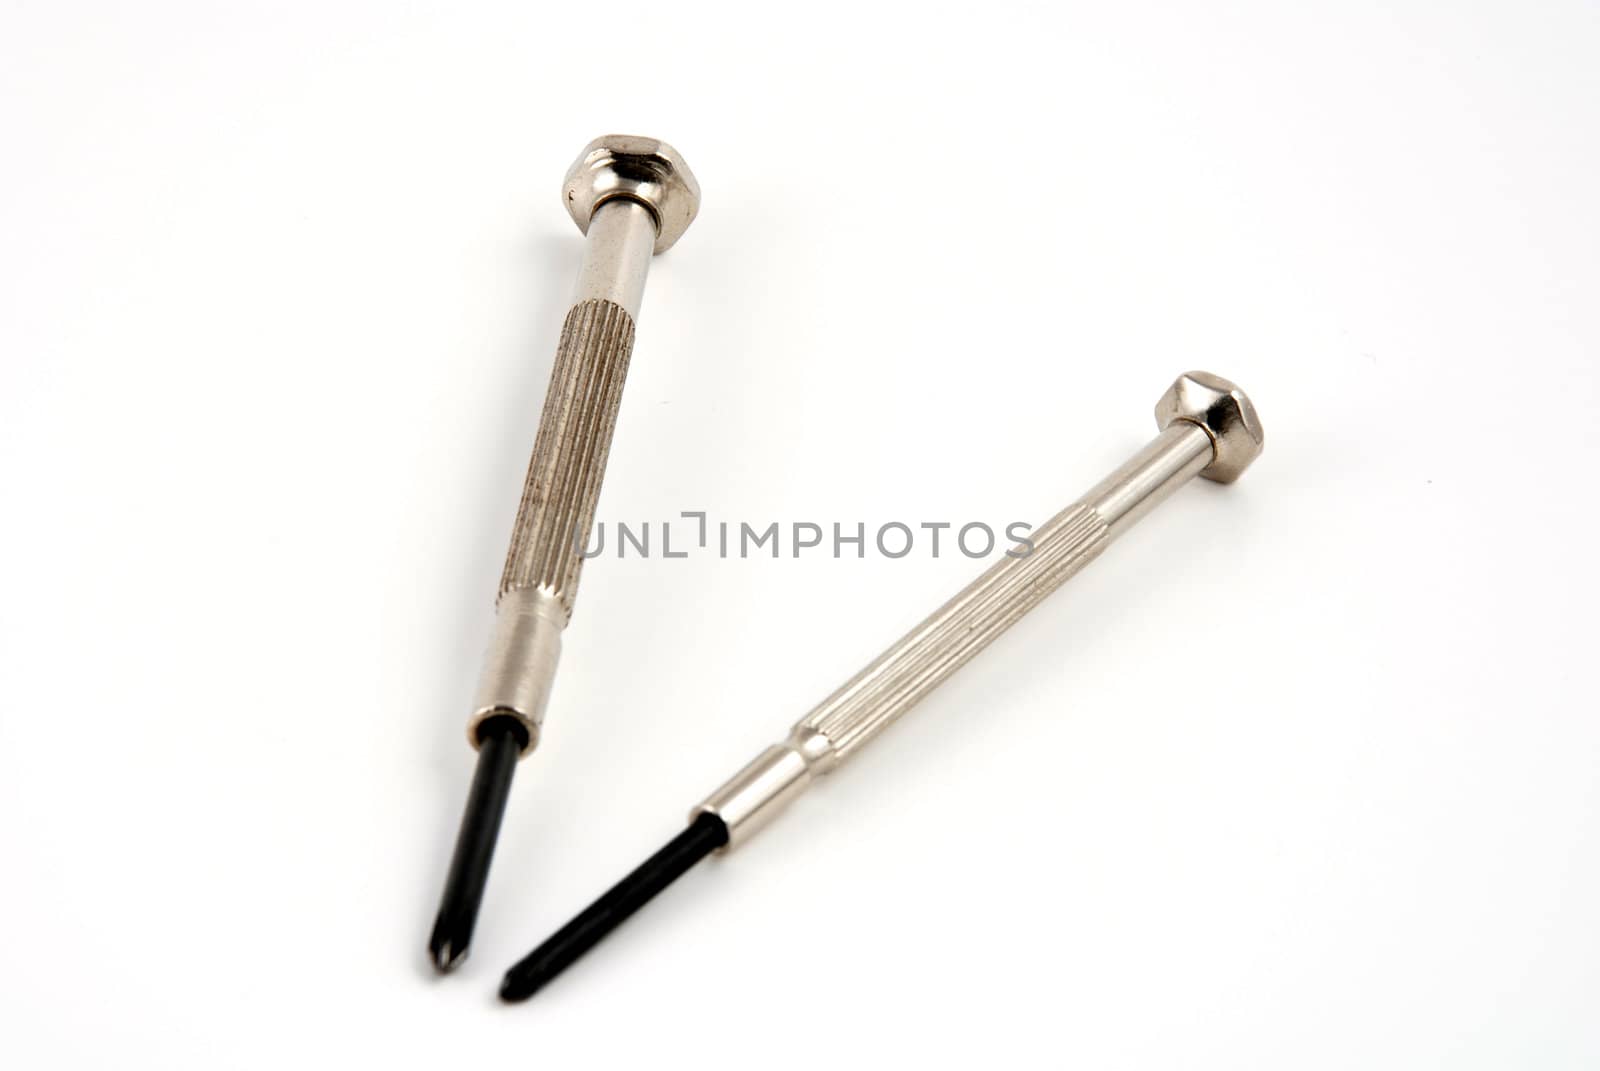 Pictures of small screwdrivers used for precission work